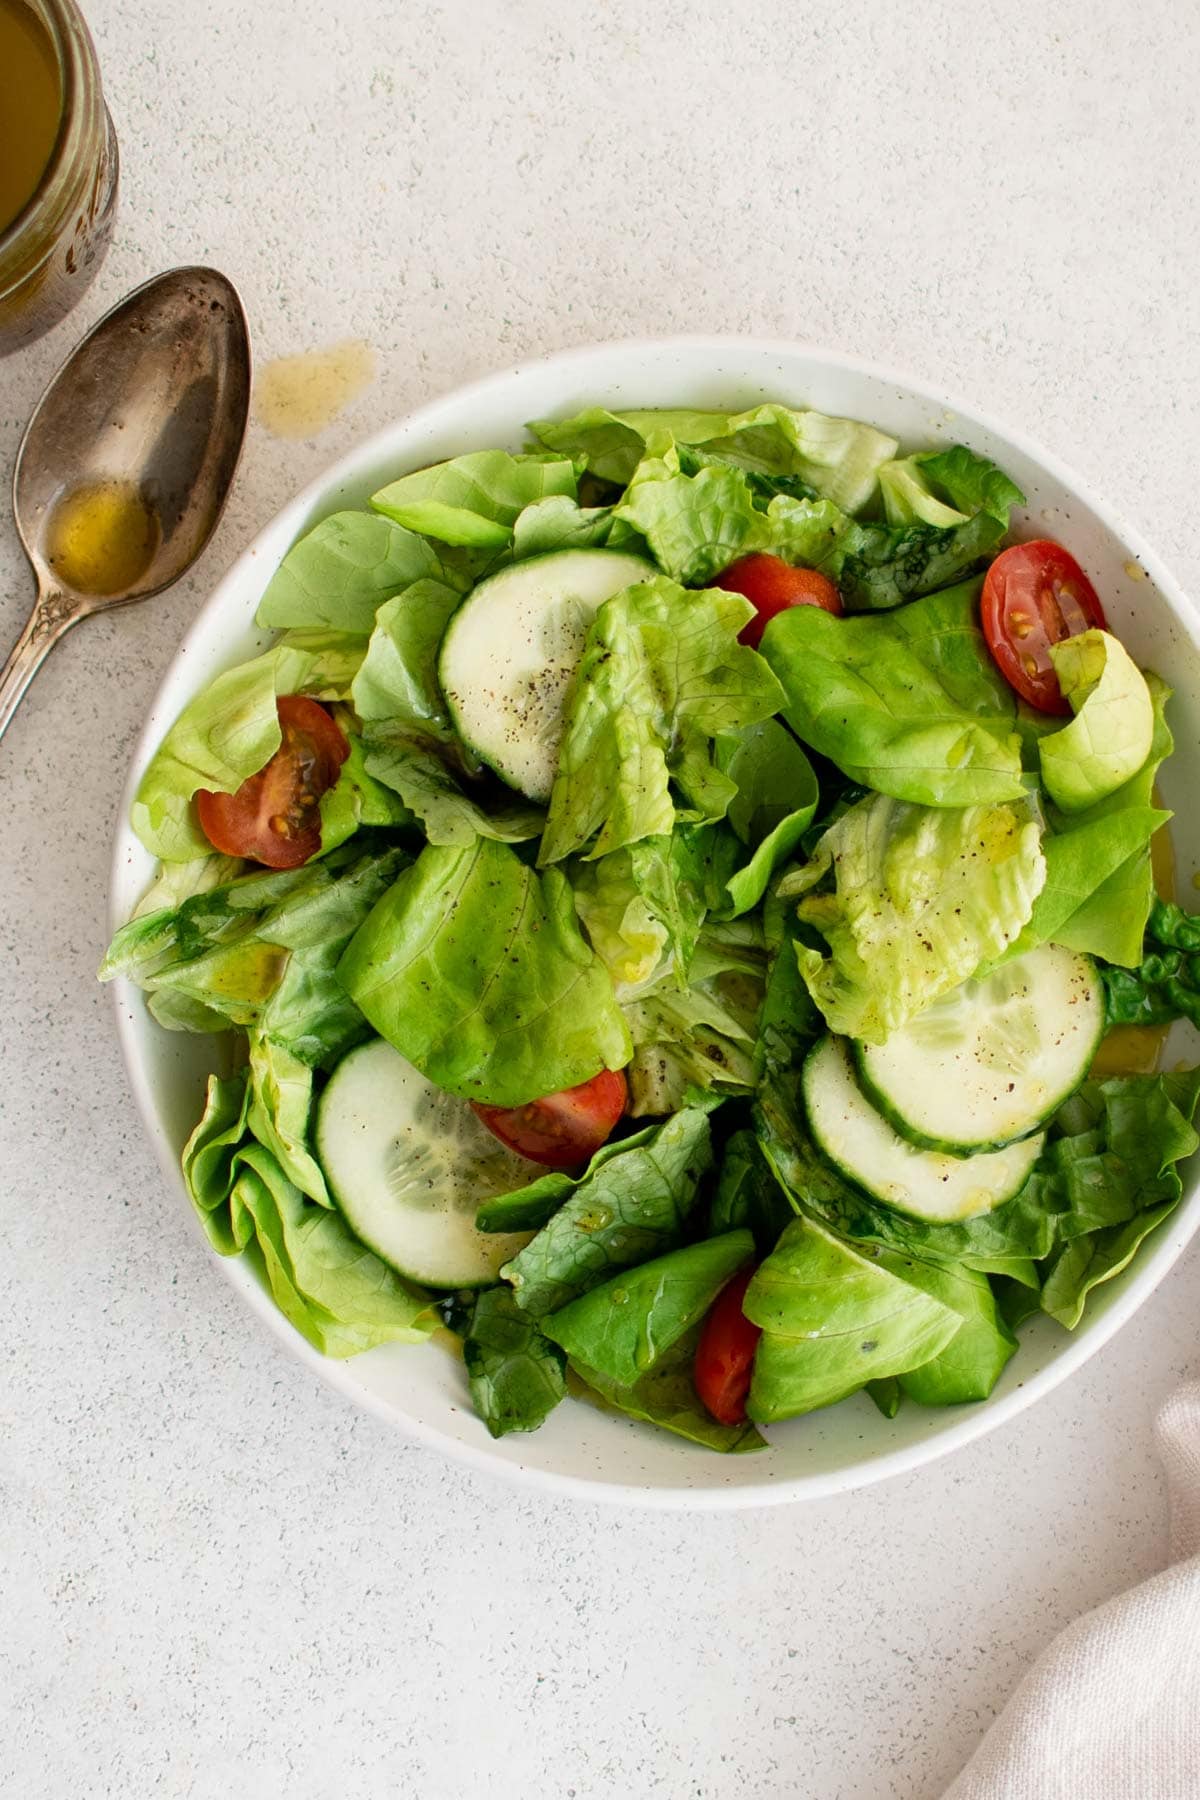 Small salad with cucumbers and tomatoes in a white bowl.